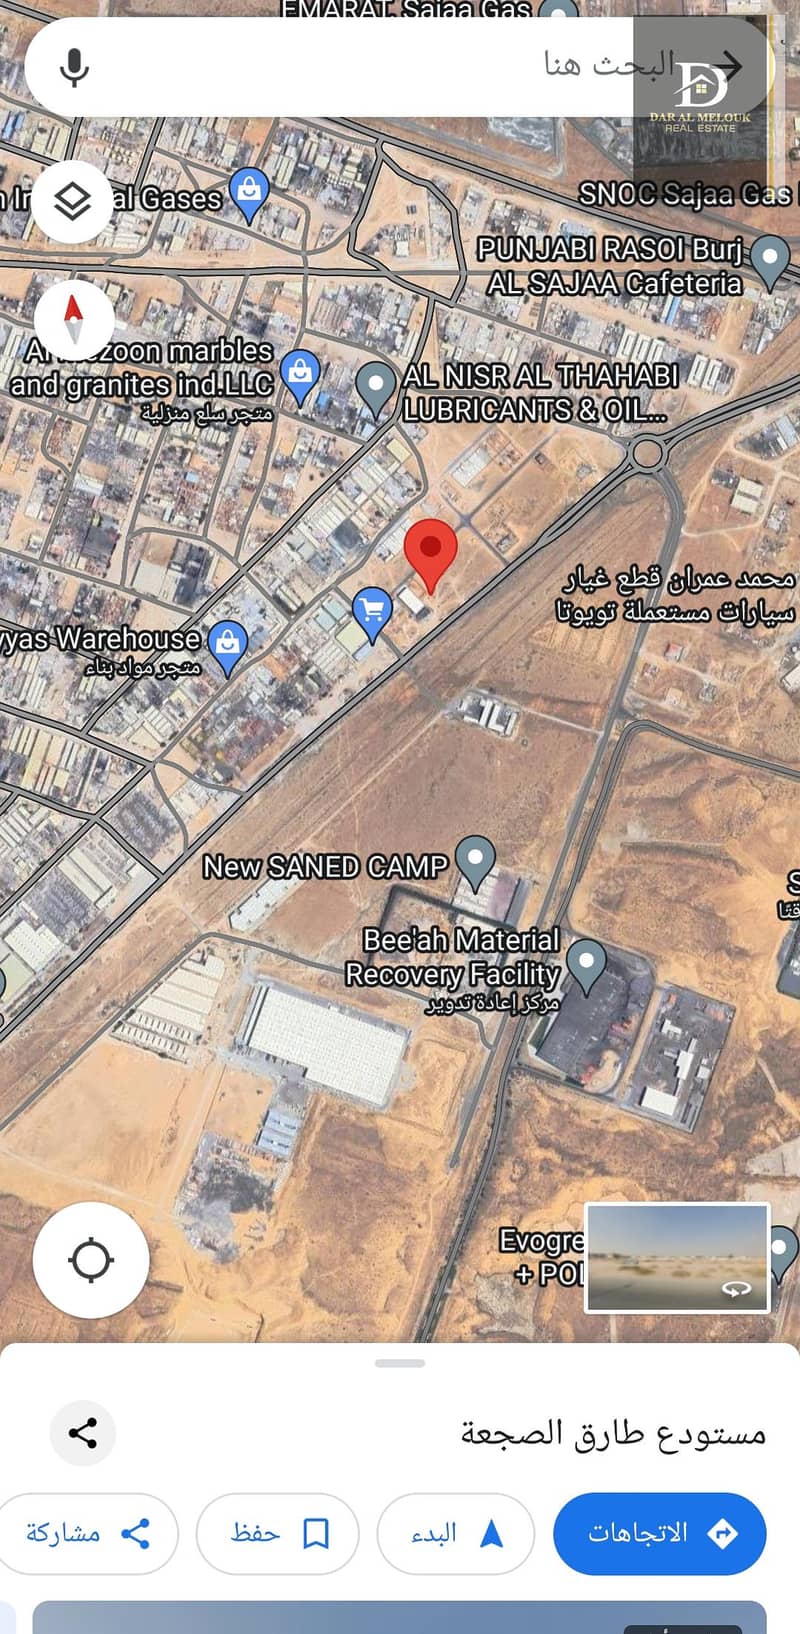 For sale in Sharjah

 Al-Saja'a industrial area

 Industrial land area

 1350 feet permit

 Industrial, commercial
 On a public street

 Electricity fees paid

 The plan is ready for construction

 Piece price required

 100 dirhams